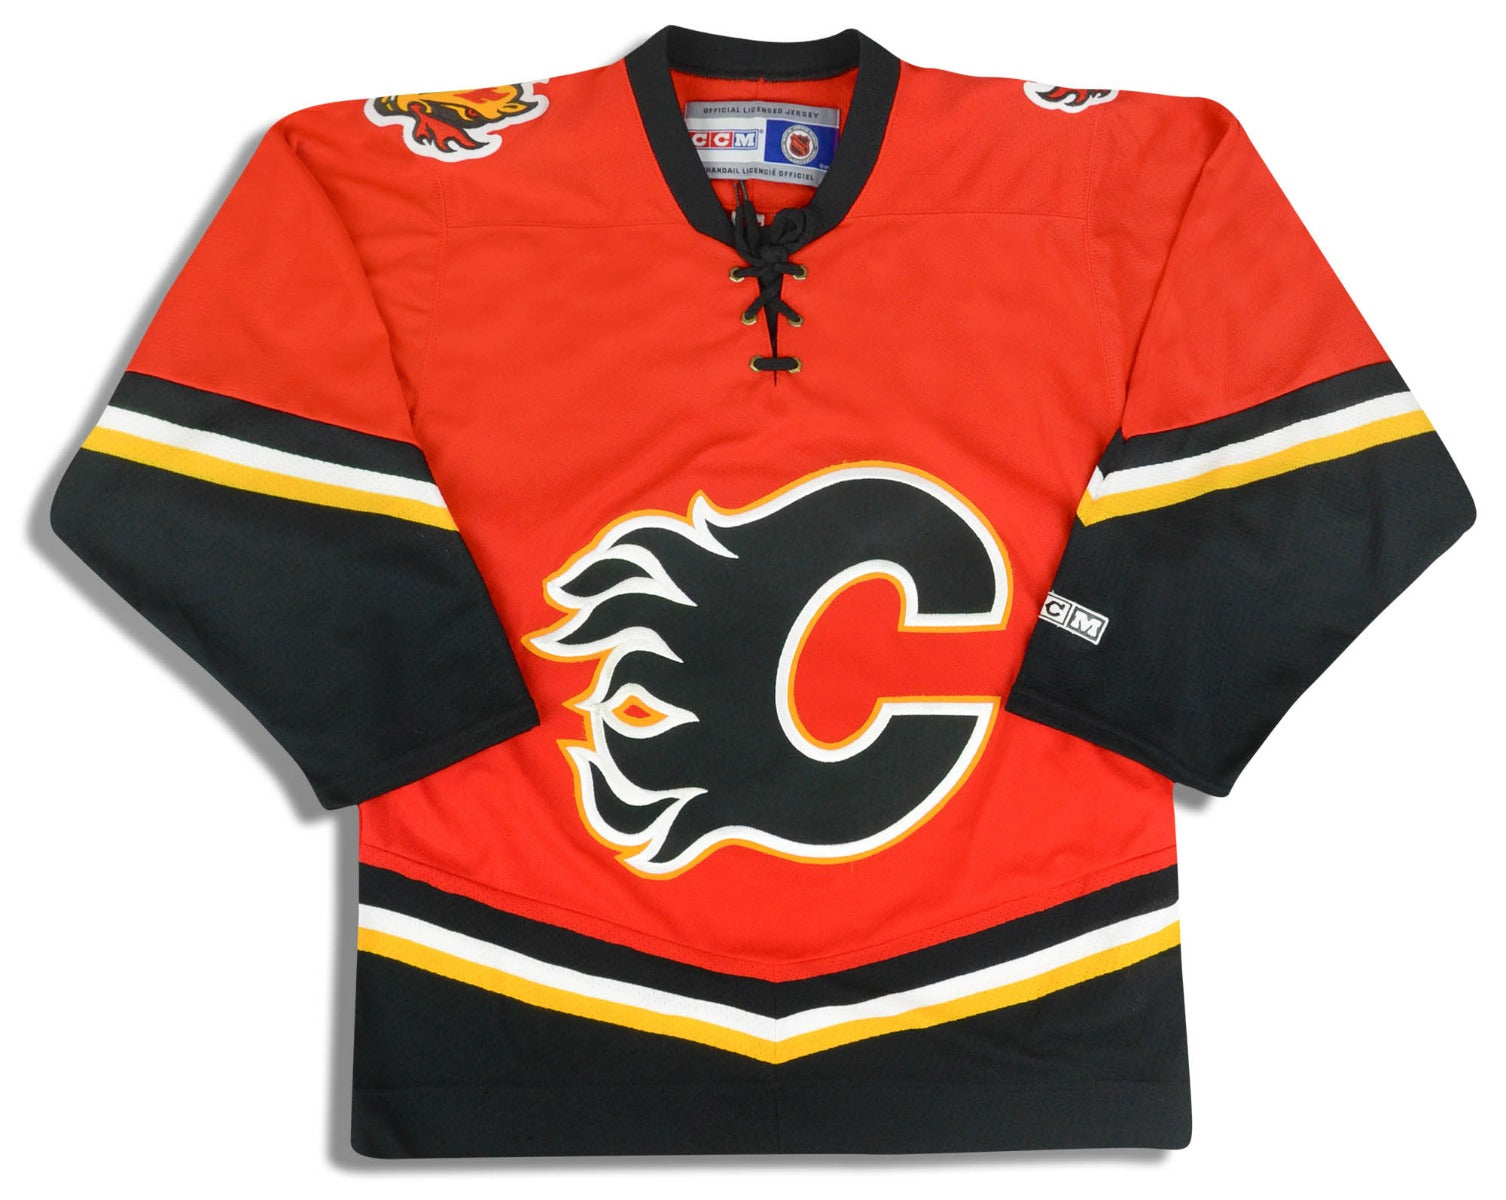 Vintage Calgary Flames CCM Jersey. All Stitched. Adult XL. 2003 to